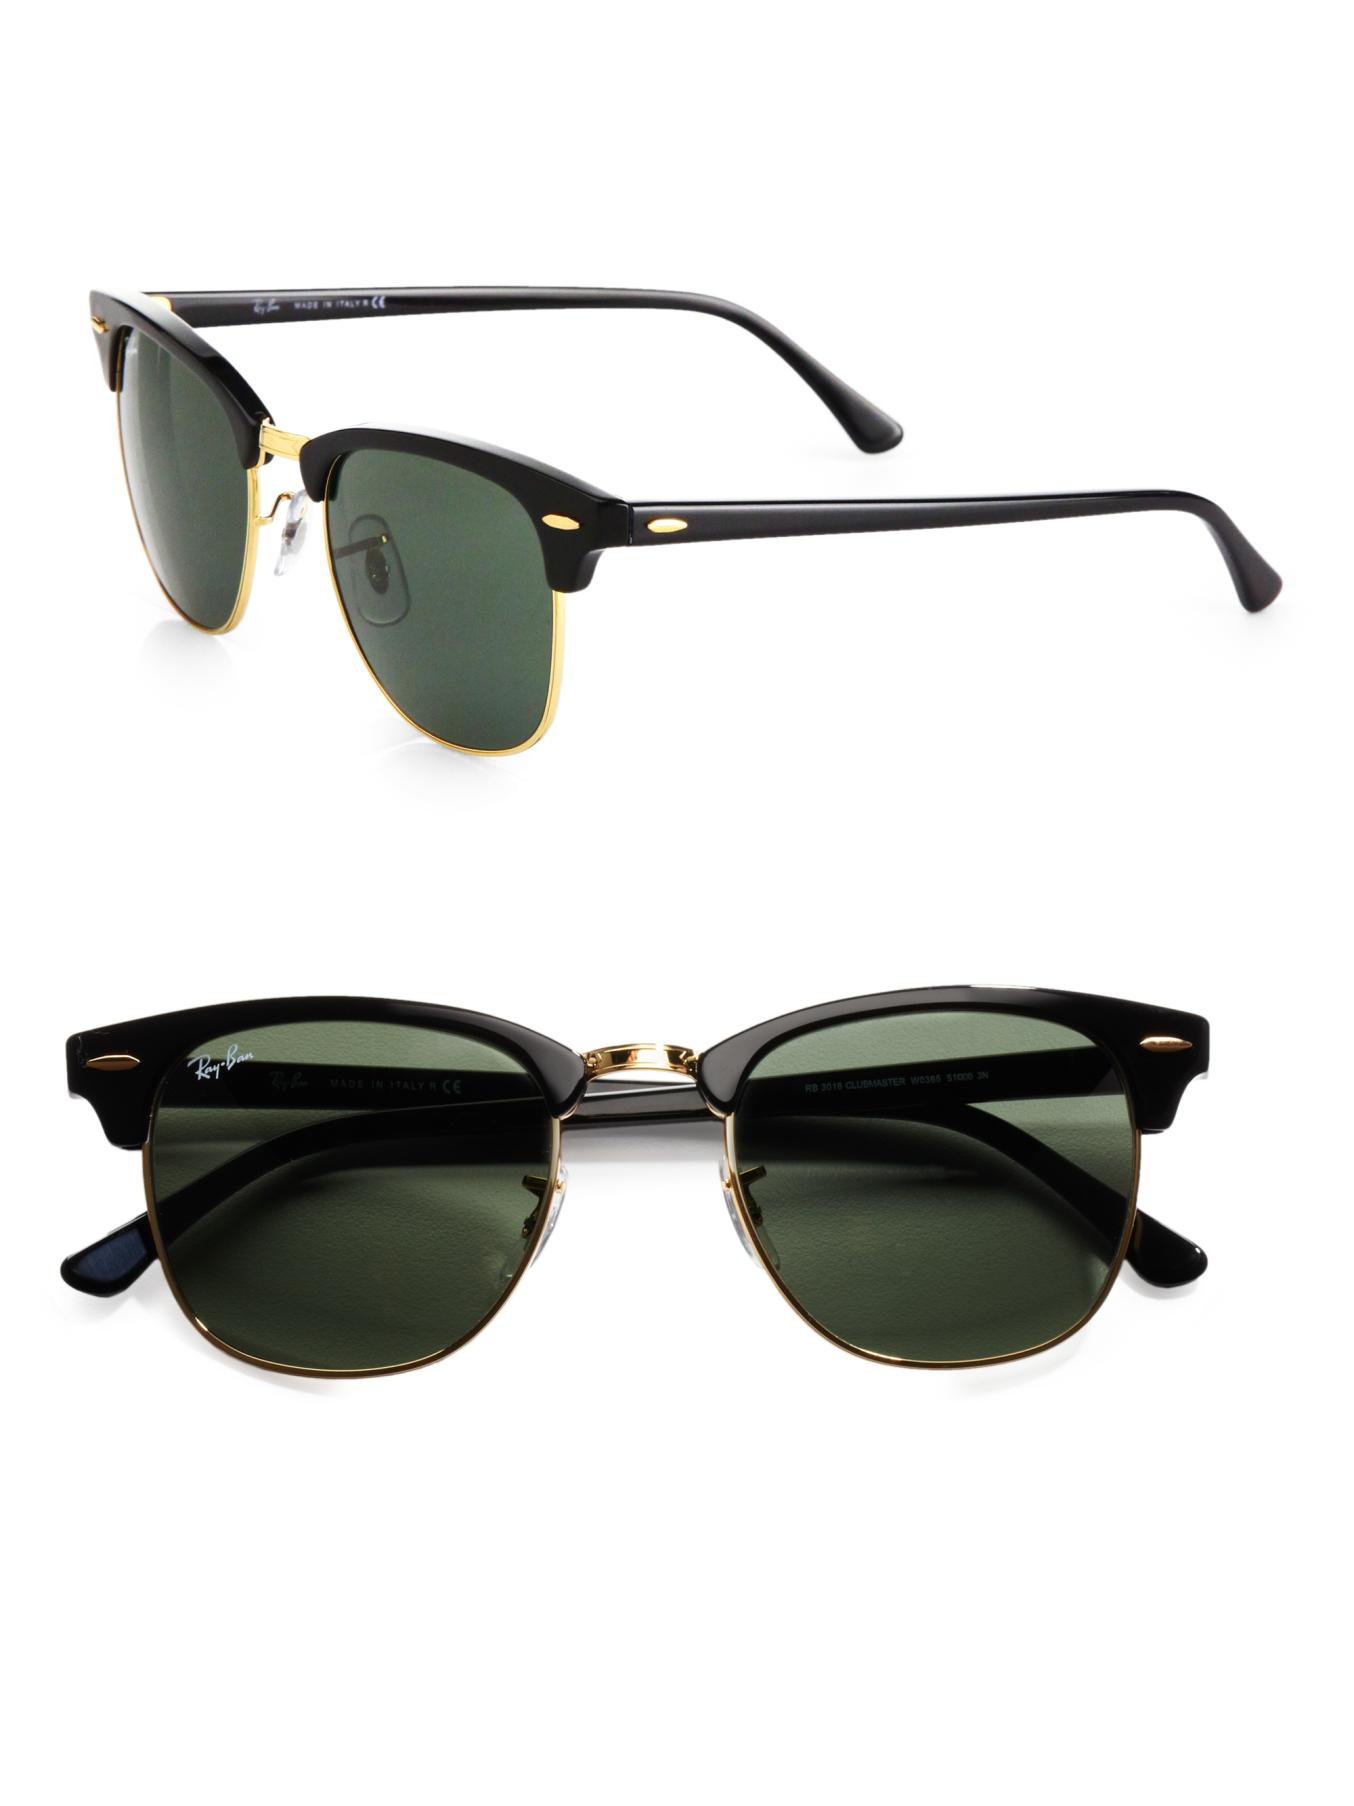 Ray ban clubmaster classic